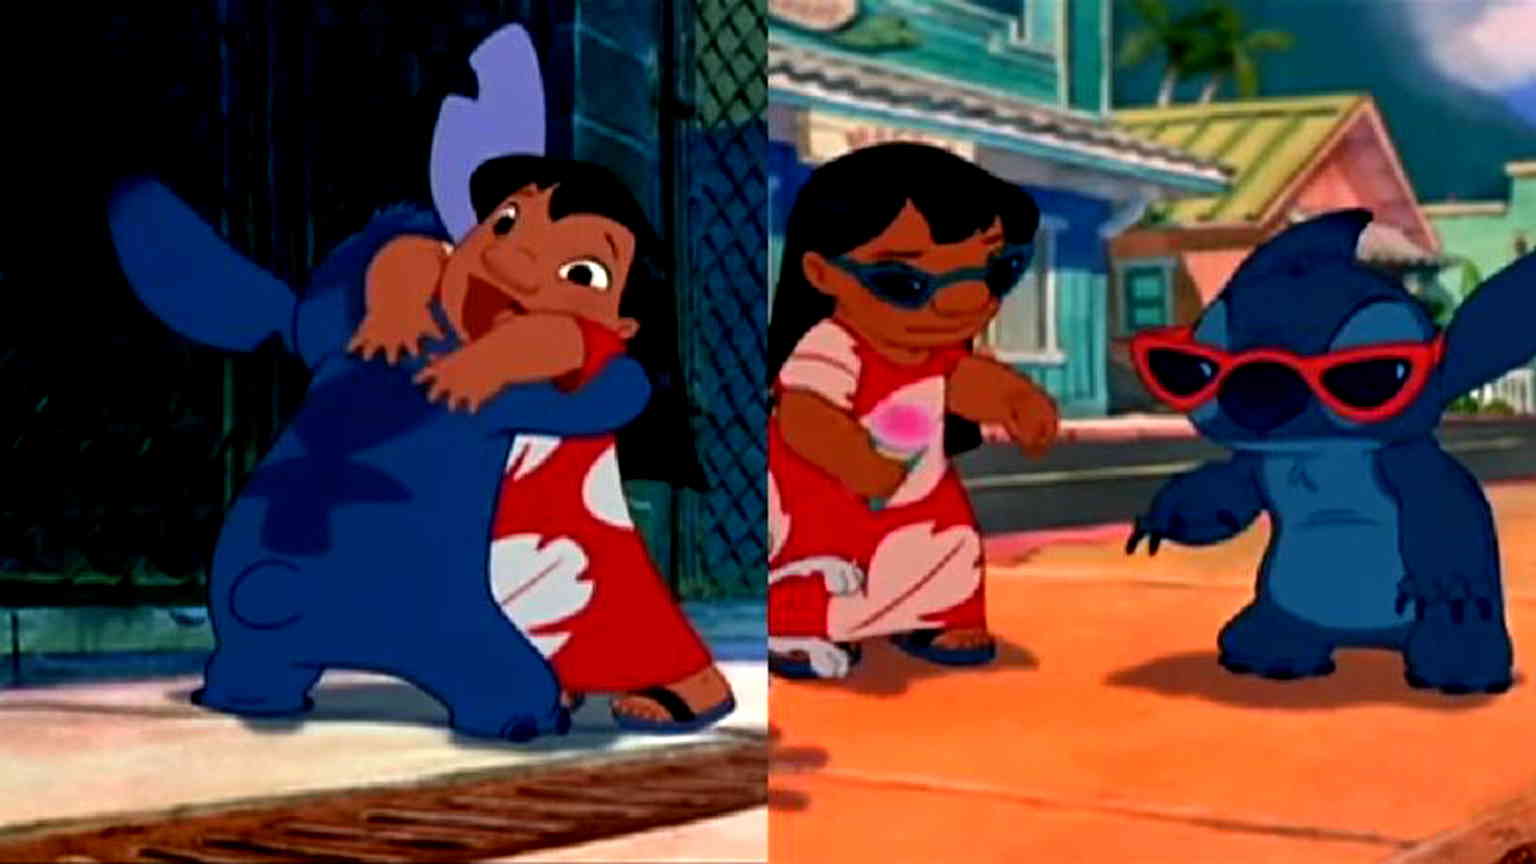 Disney still searching for actor to play Lilo in upcoming live-action ‘Lilo and Stitch’